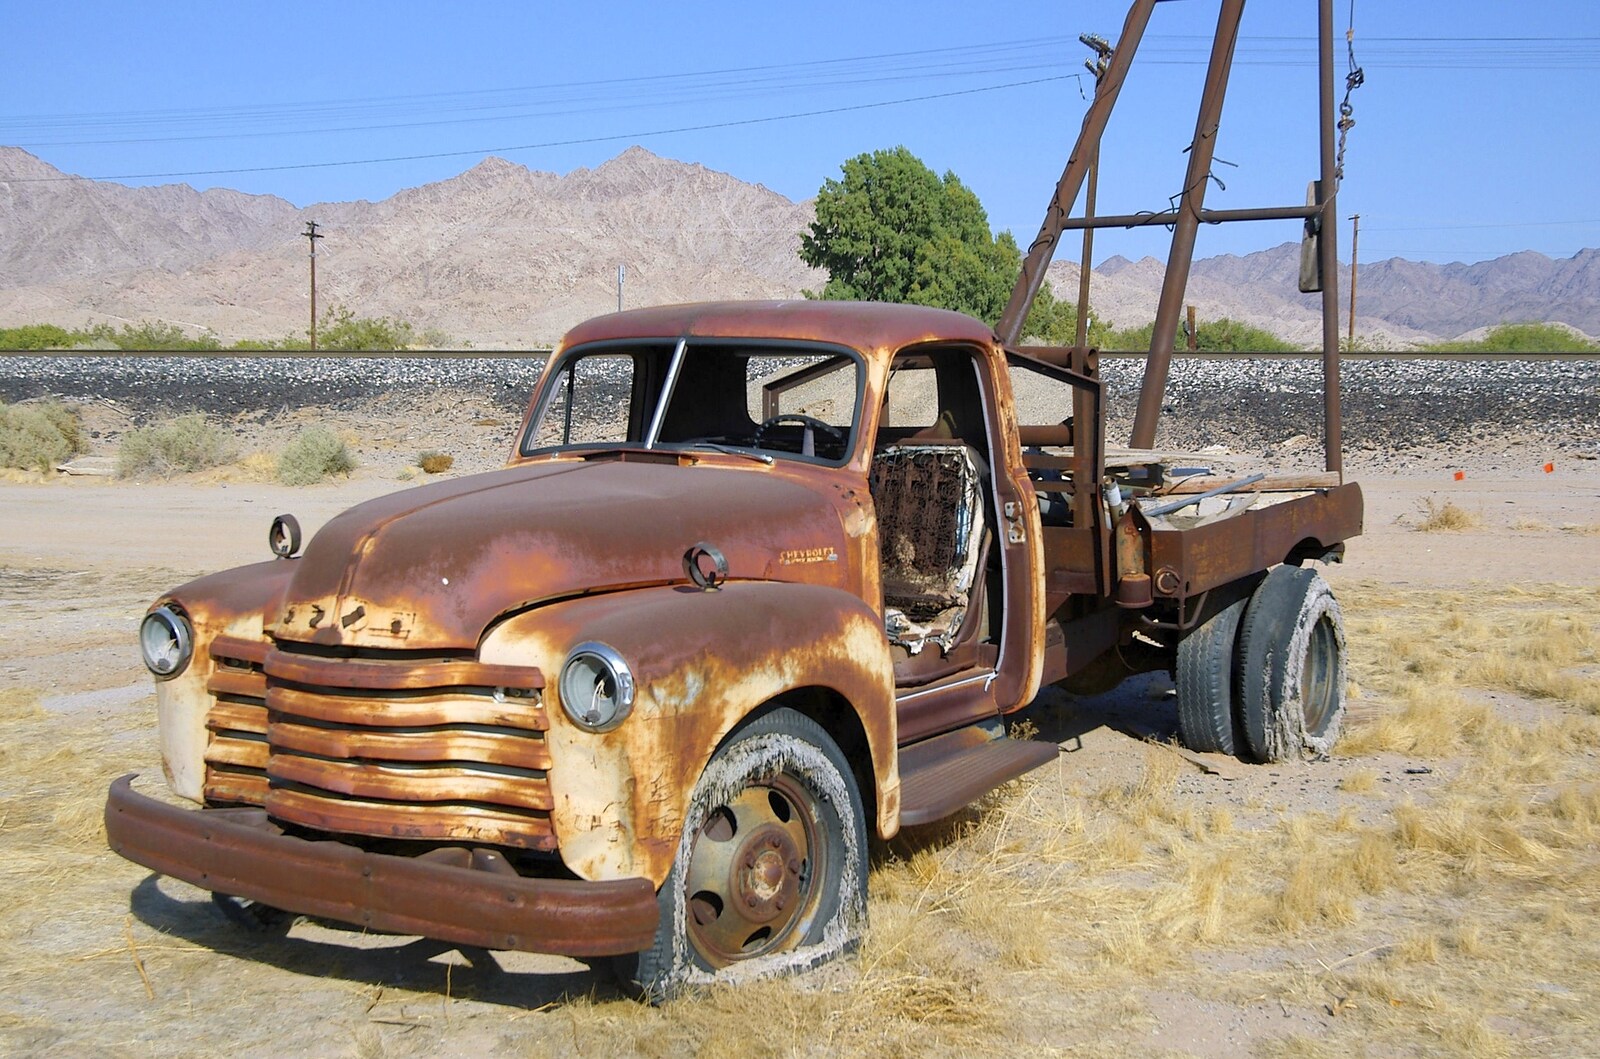 An old 50s Chevrolet pickup rusts away from San Diego Seven: The Desert and the Dunes, Arizona and California, US - 22nd April